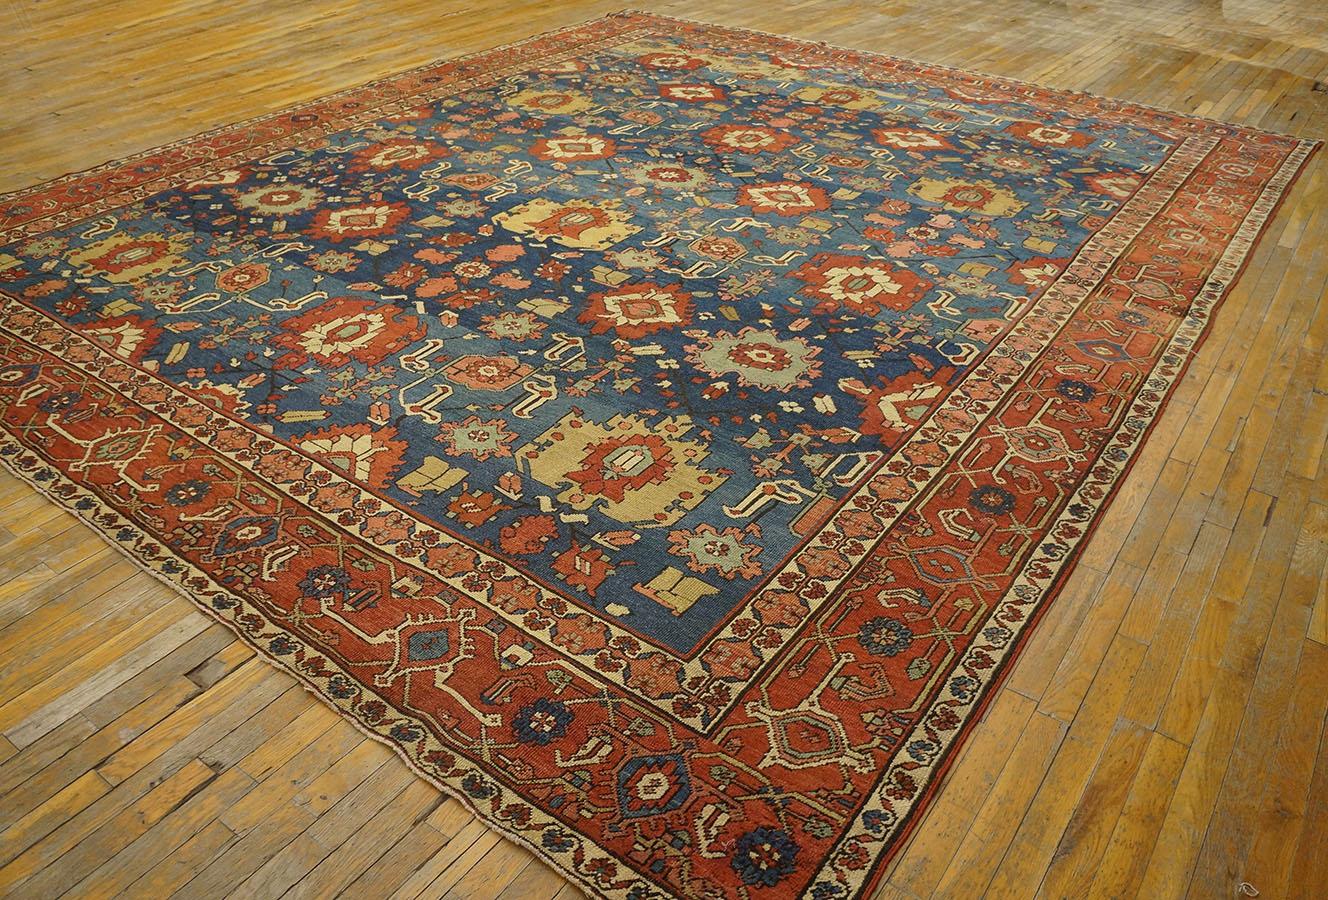 Hand-Knotted Late 19th Century N.W. Persian Serapi Carpet (12' x 14' 6